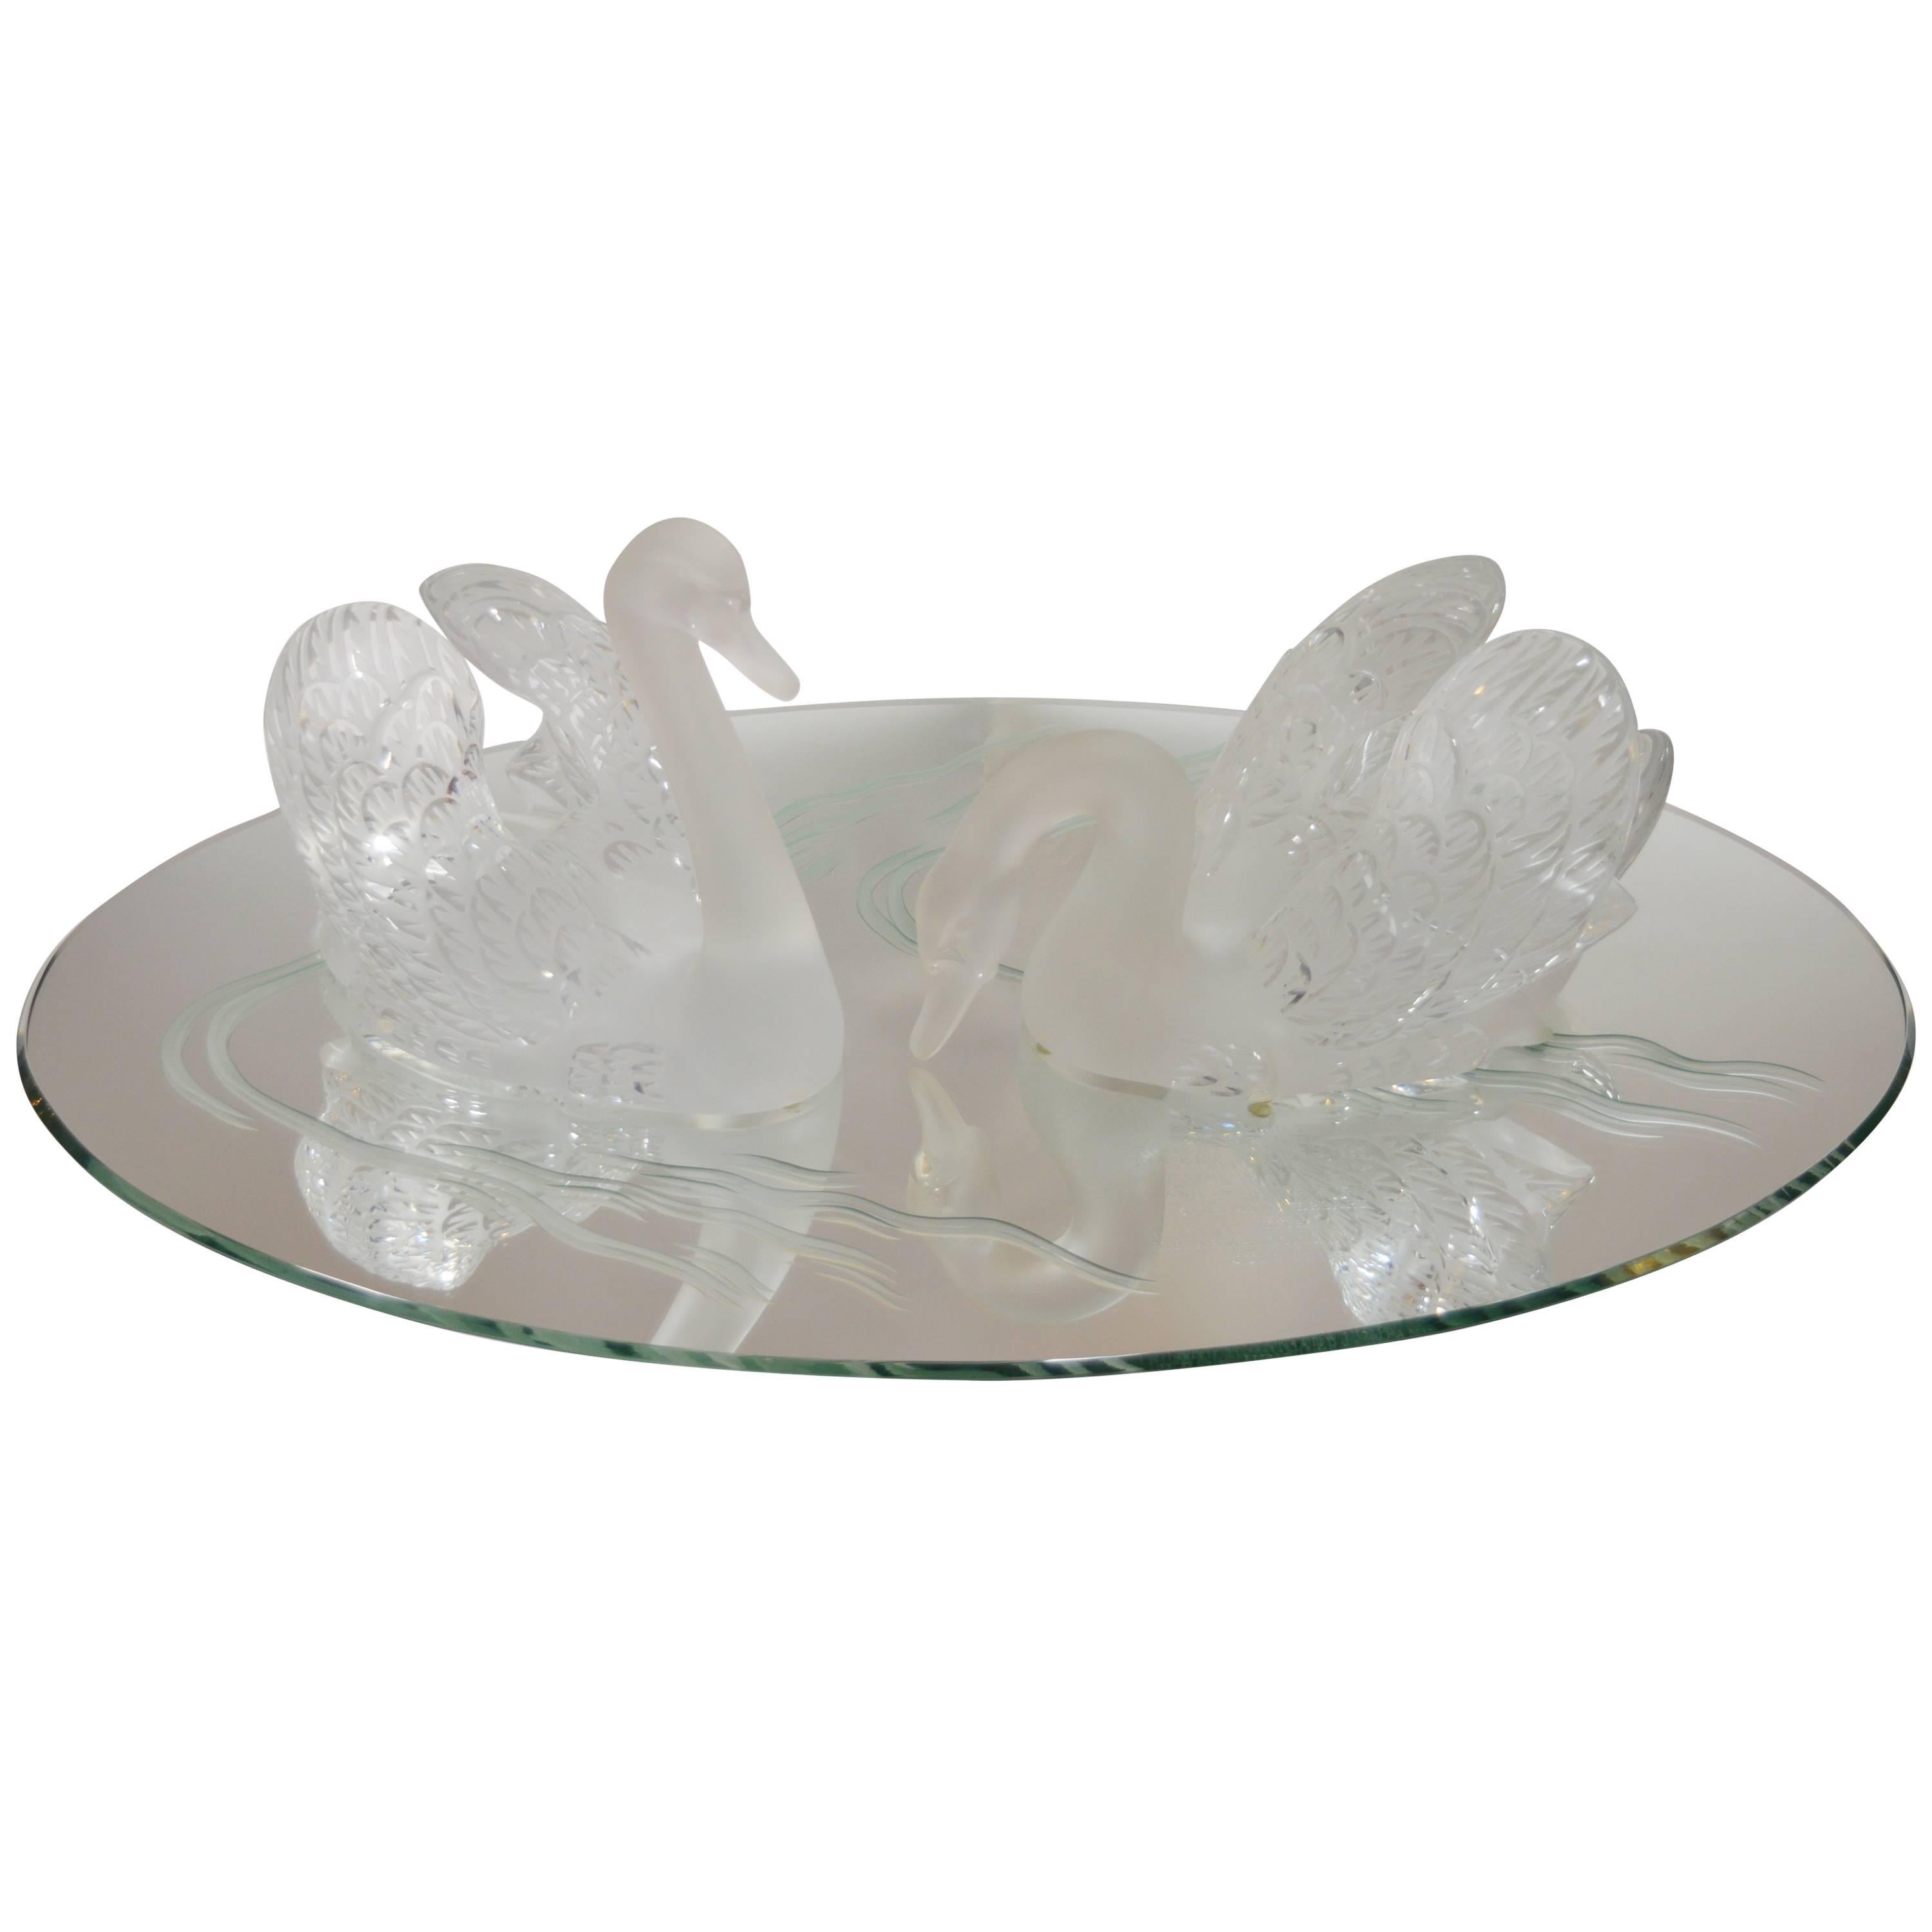 Pair of Lalique Swans on a Mirrored Plateau